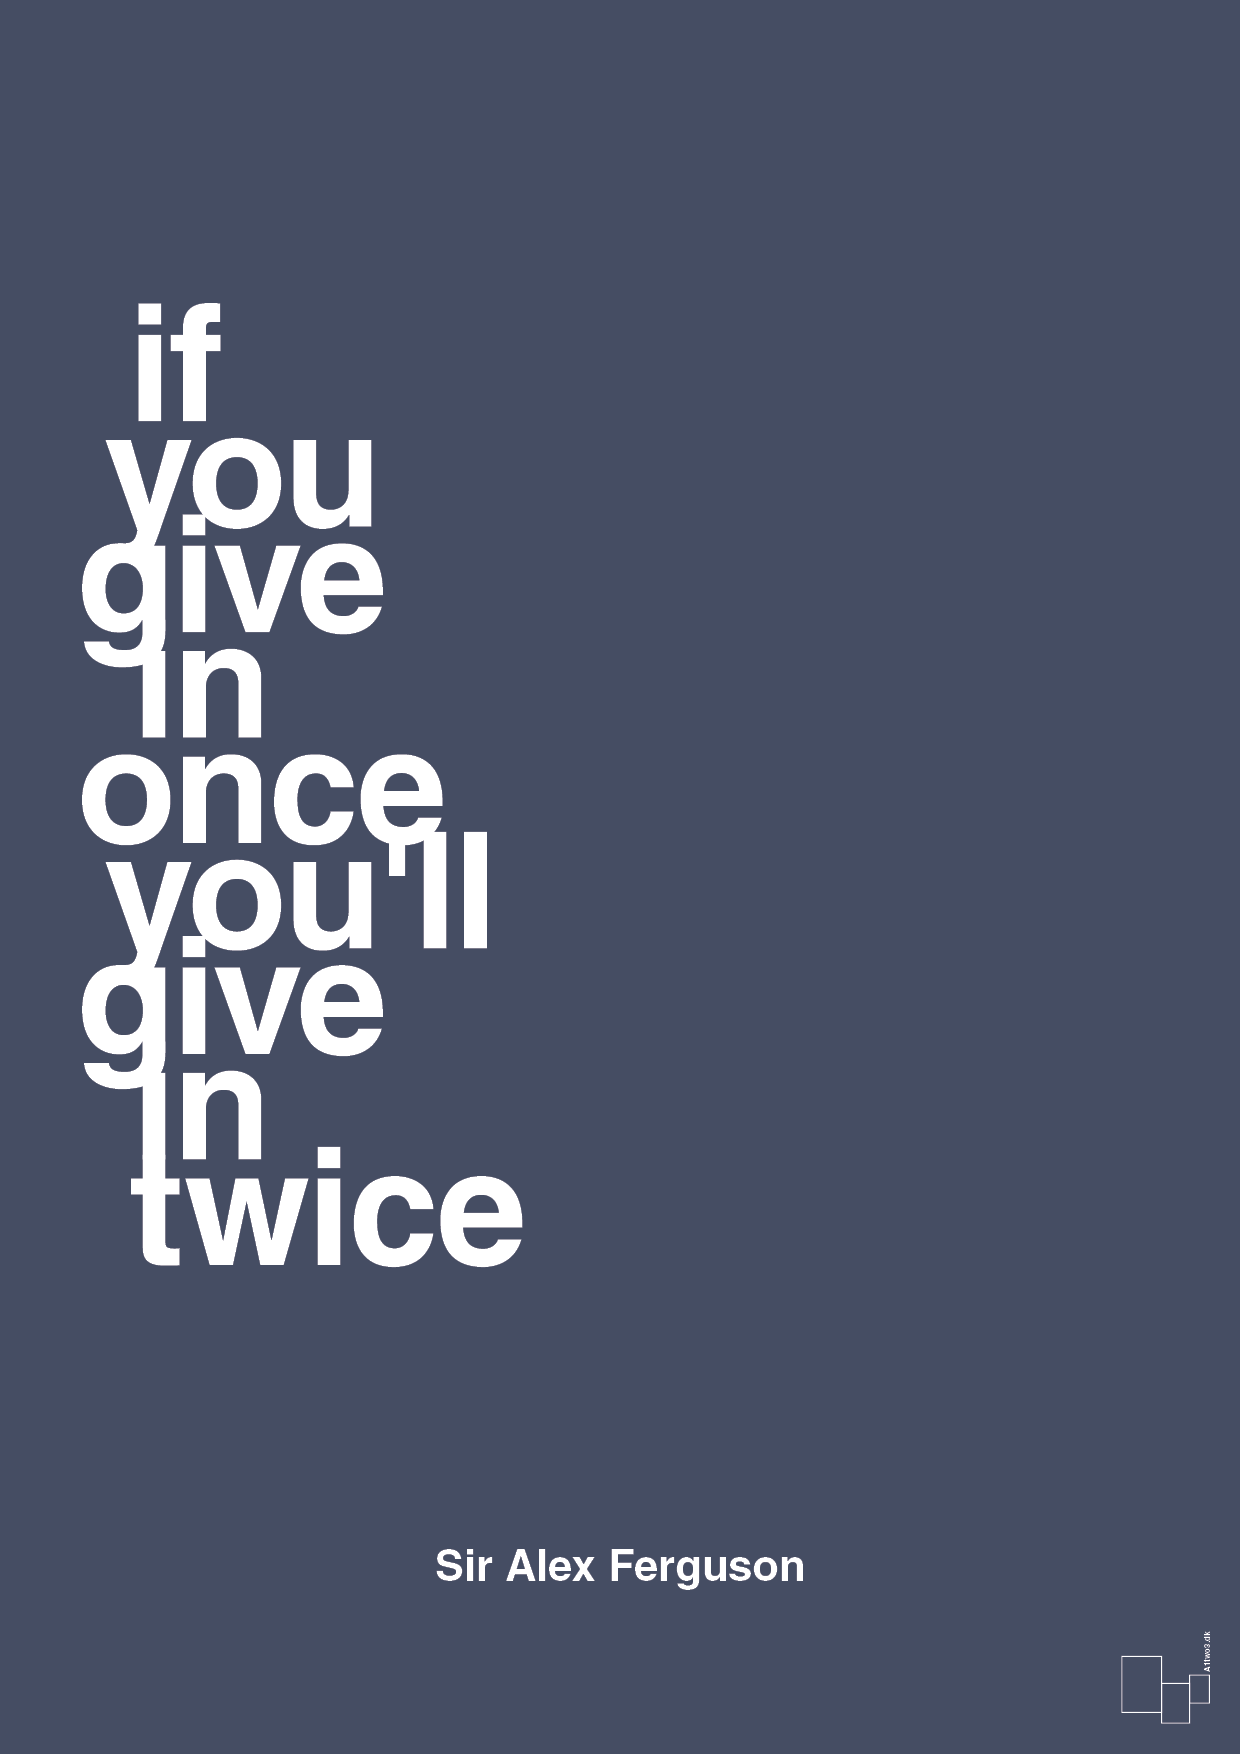 if you give in once you'll give in twice - Plakat med Citater i Petrol